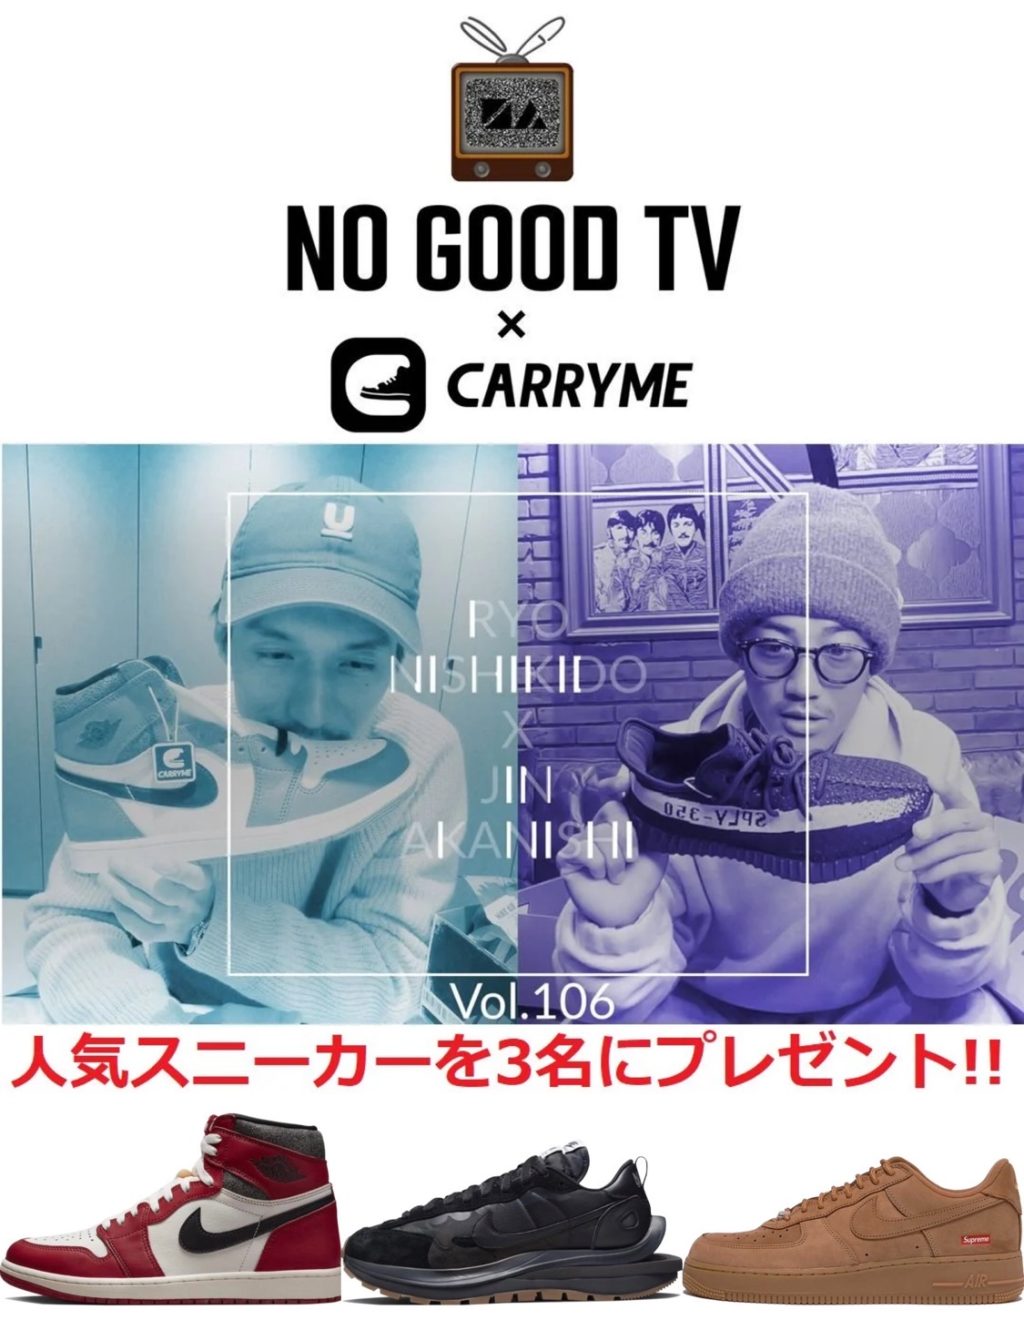 carryme-no-good-tv-collaboration-sneaker-present-campaign-nike